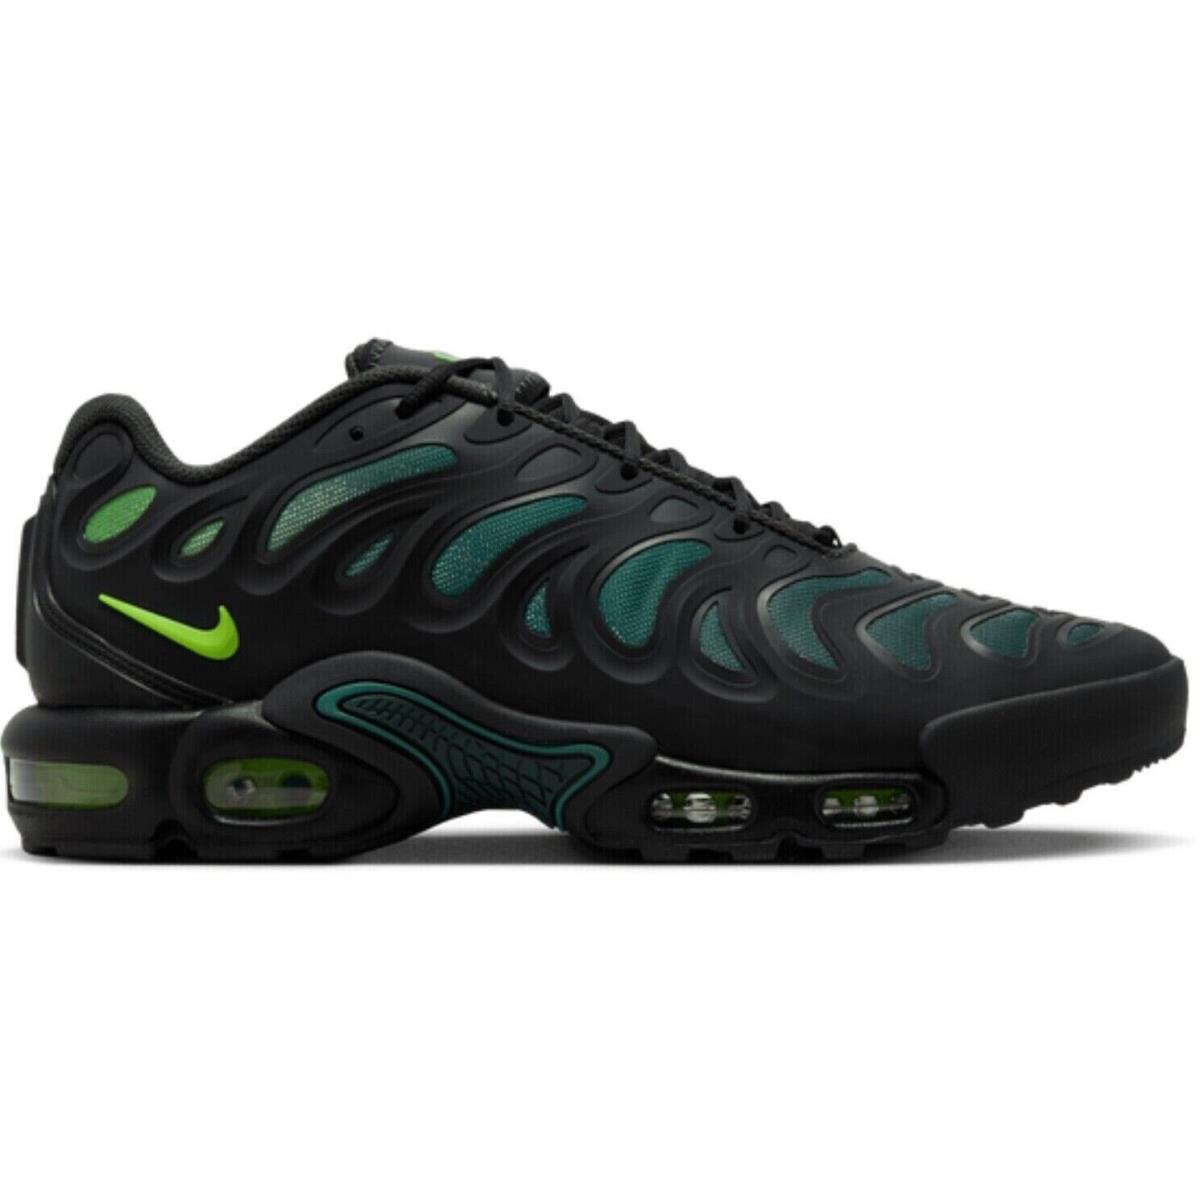 Nike Air Max Plus Drift Men`s Casual Shoes All Colors US Sizes 7-14 Black / Anthracite / Vintage Green / Green Strike